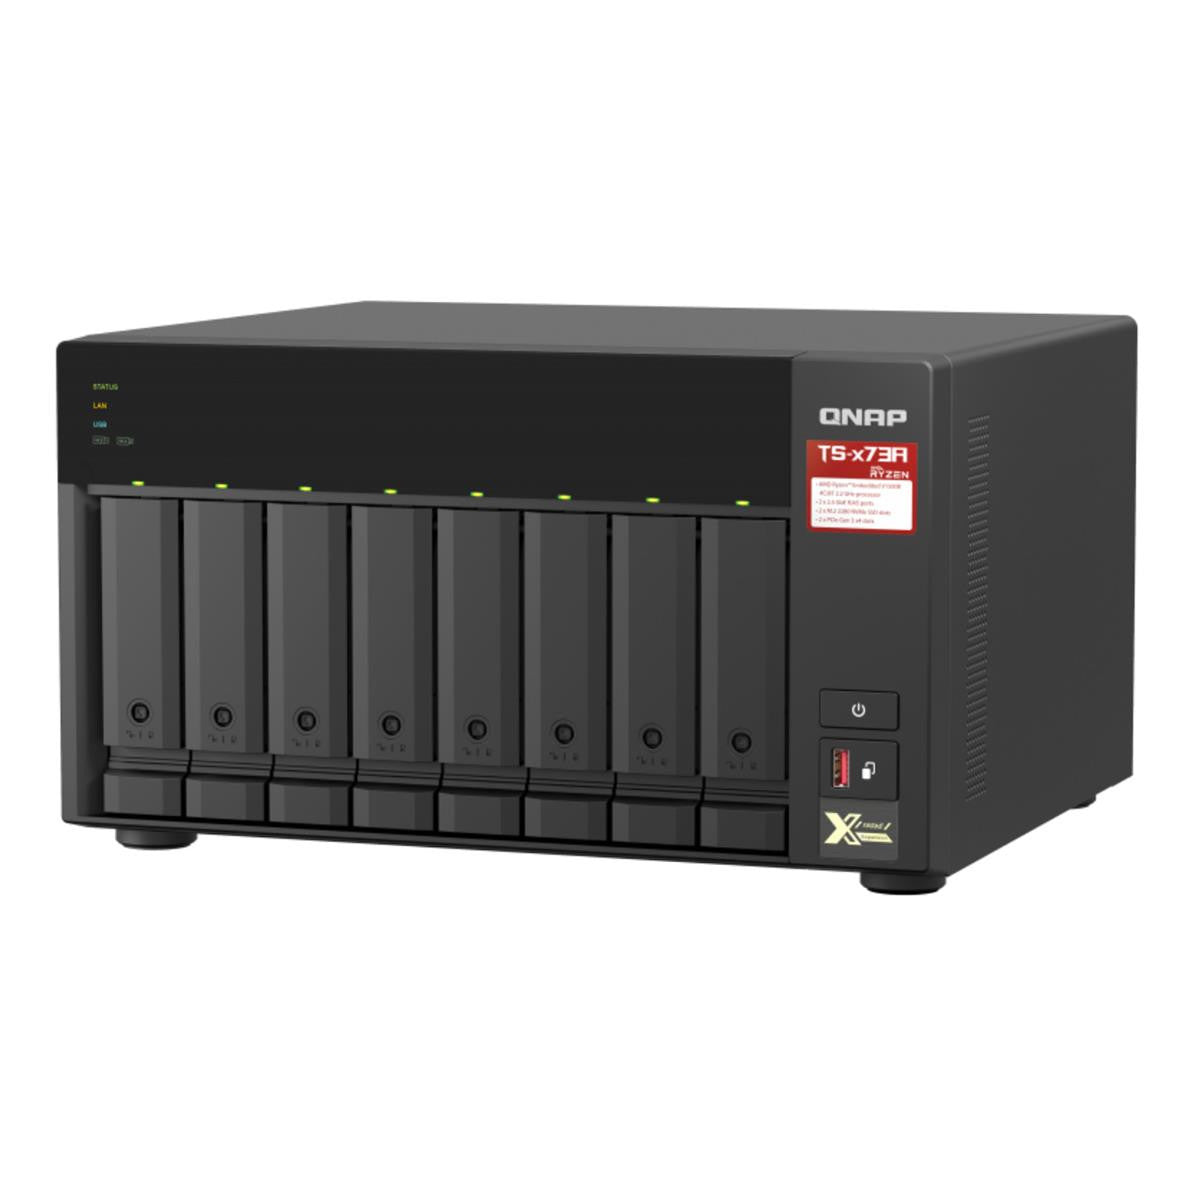 QNAP TS-873A 8-BAY NAS with 16GB DDR4 RAM and 24TB (8x3TB) Western Digital RED PLUS Drives Fully Assembled and Tested